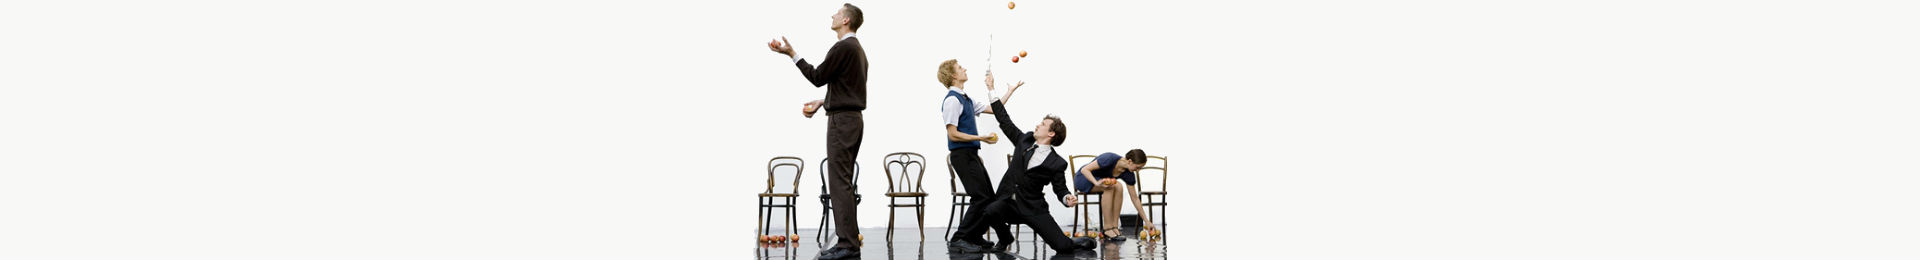 Gandini Juggling — Smashed: Special Edition tickets